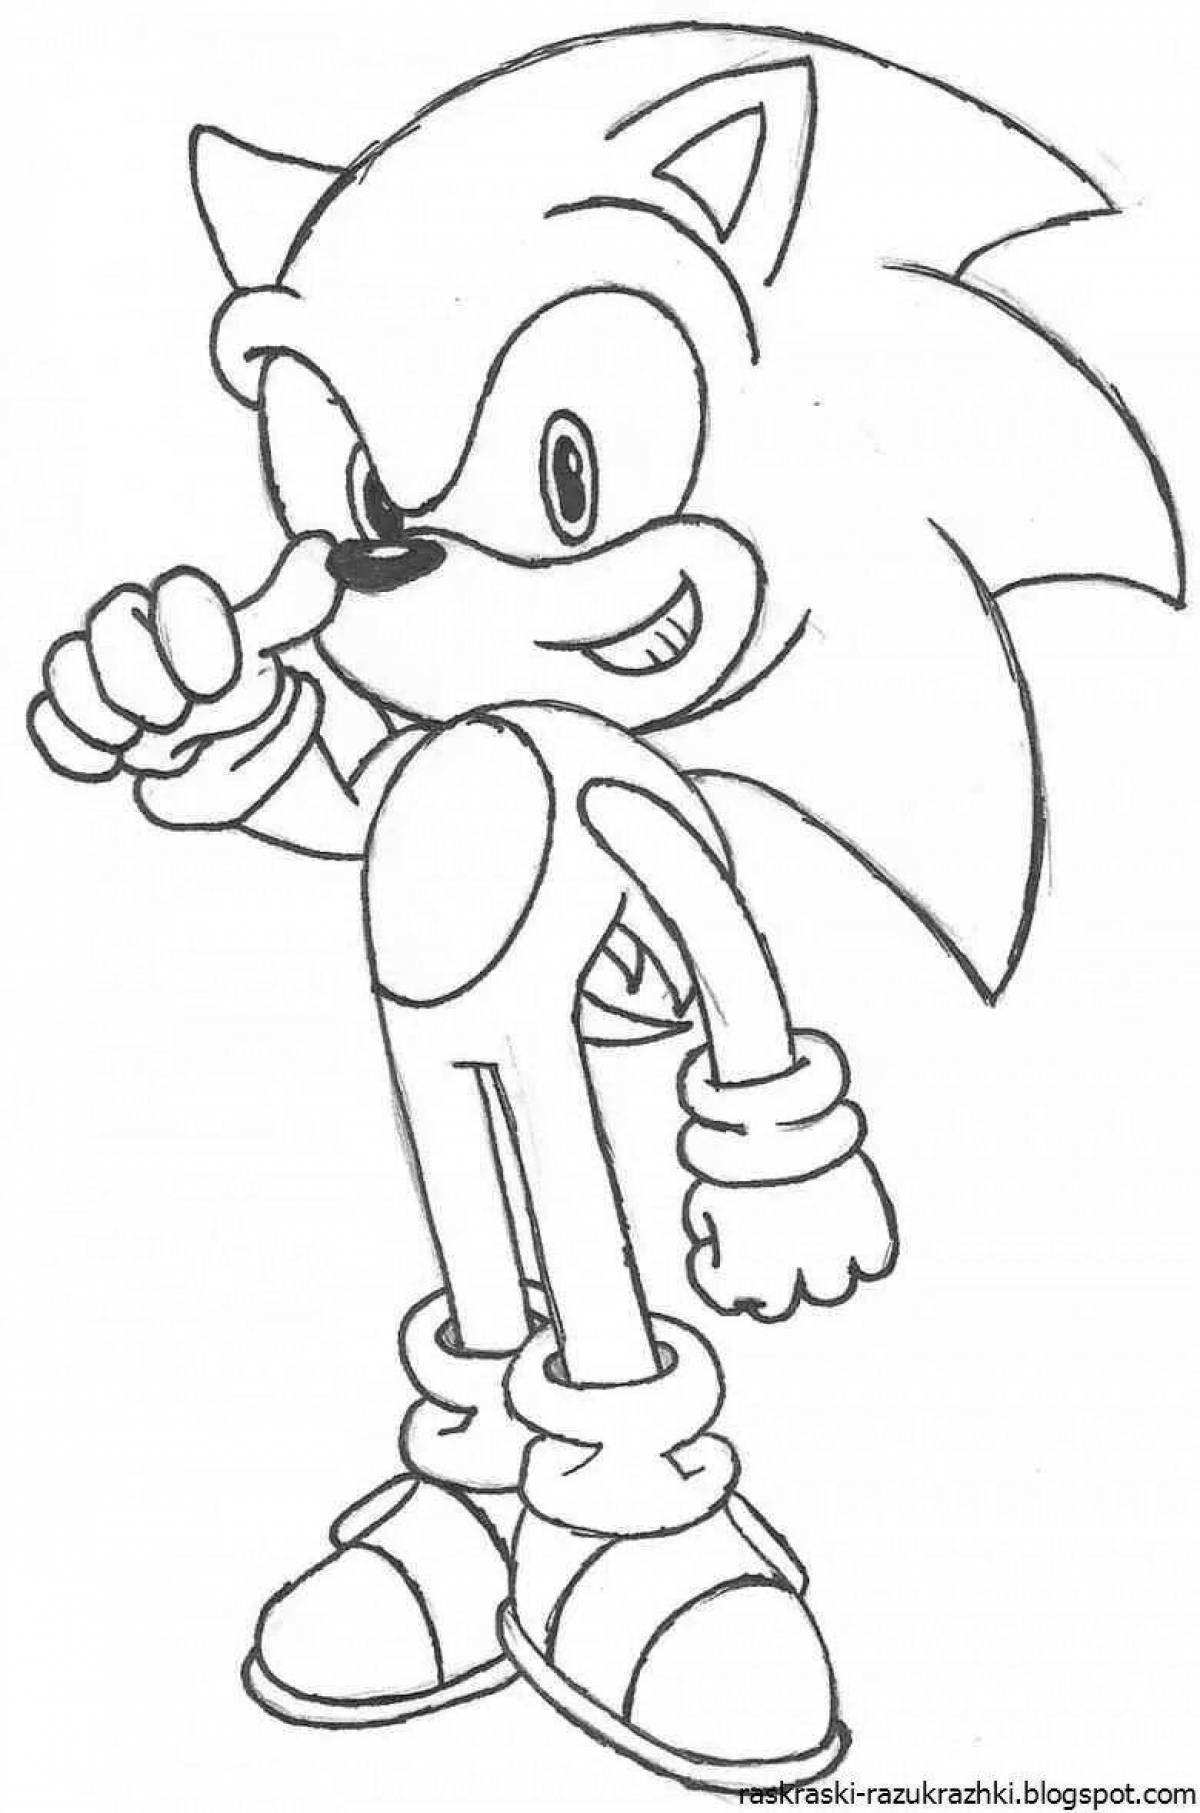 Sonic the hedgehog dazzling coloring book